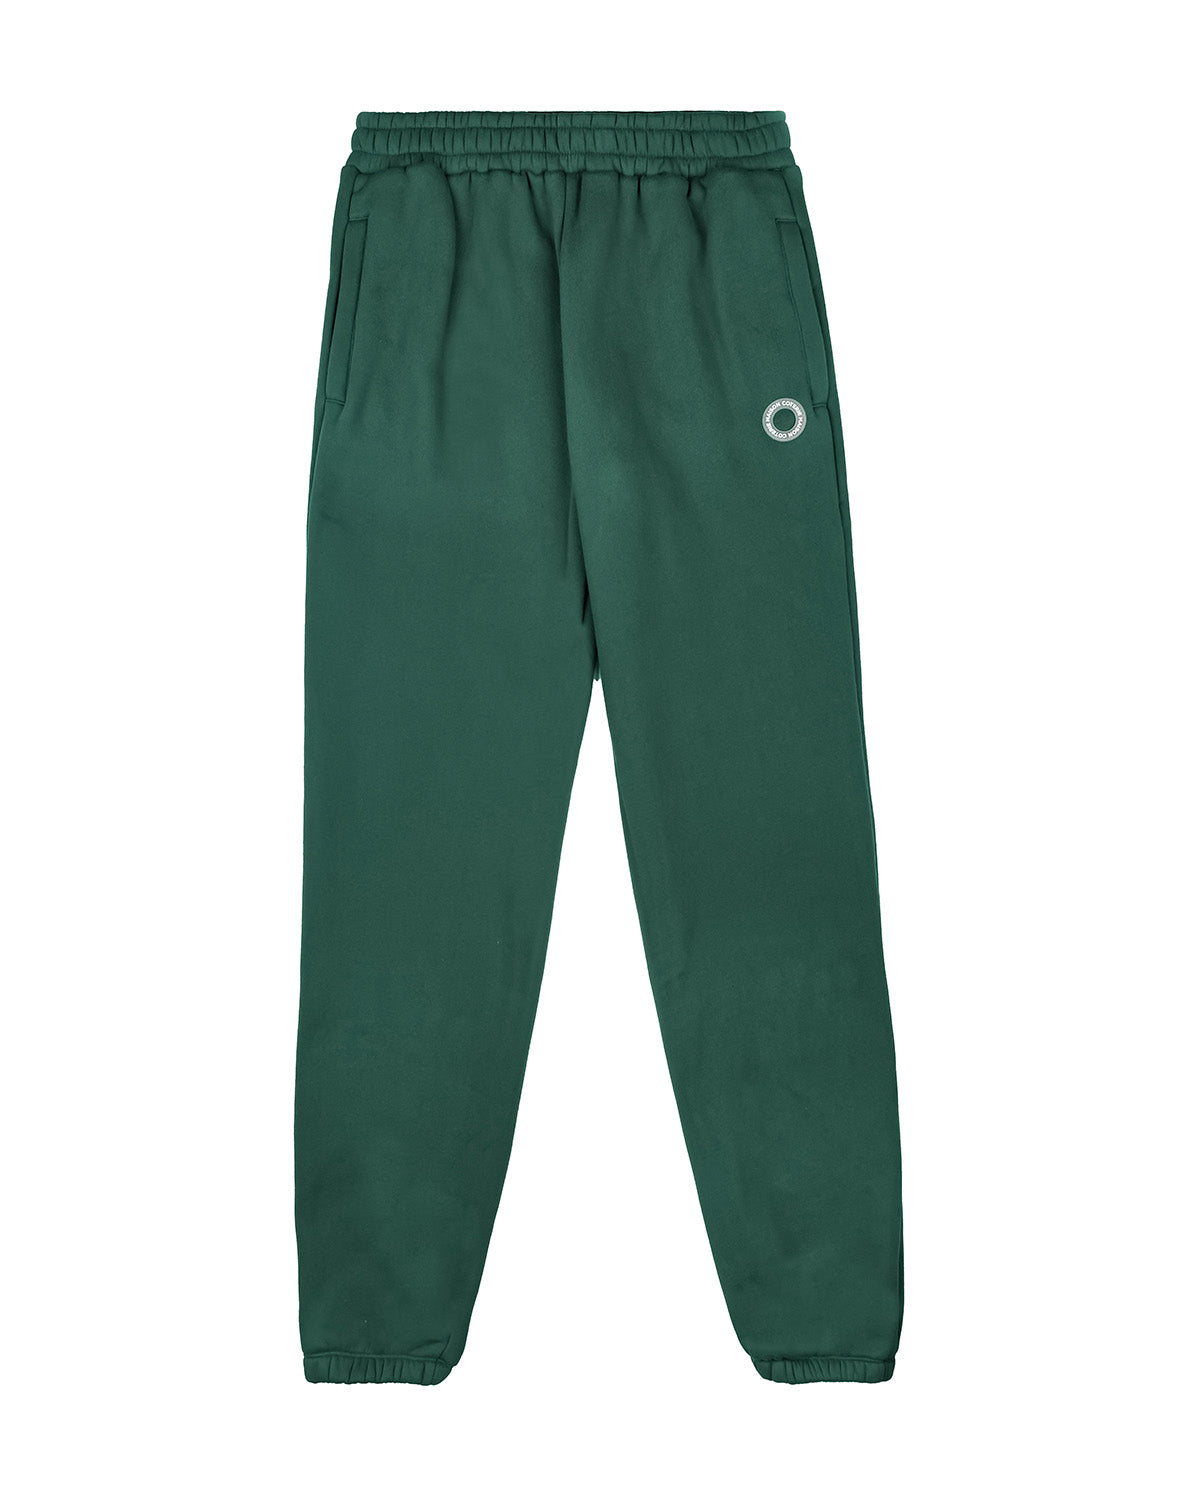 Kaylo - Forest Green Sweatpants with Rubber Patch